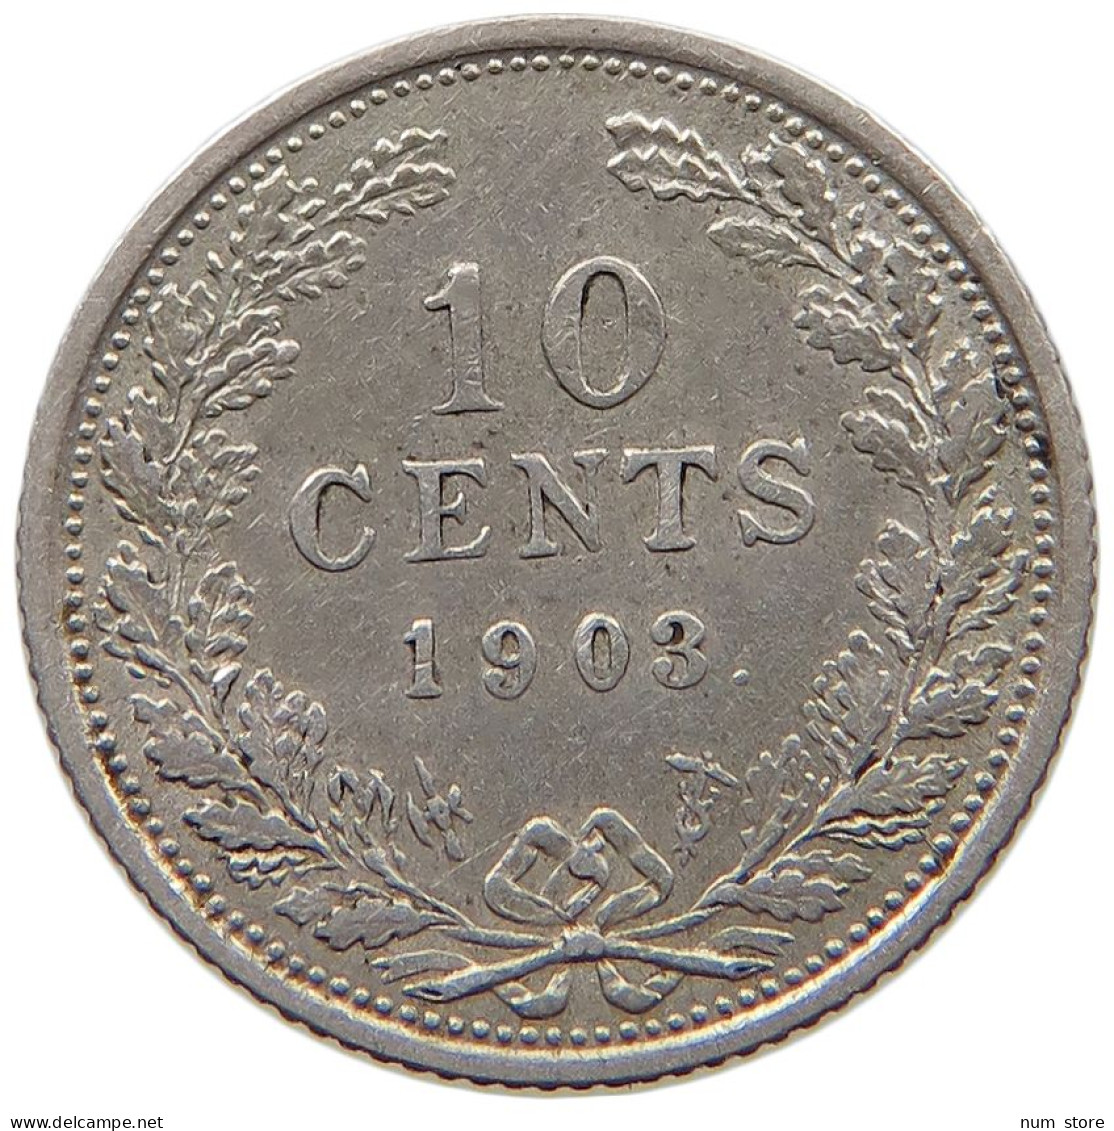 NETHERLANDS 10 CENTS 1903  #MA 021243 - 10 Cent